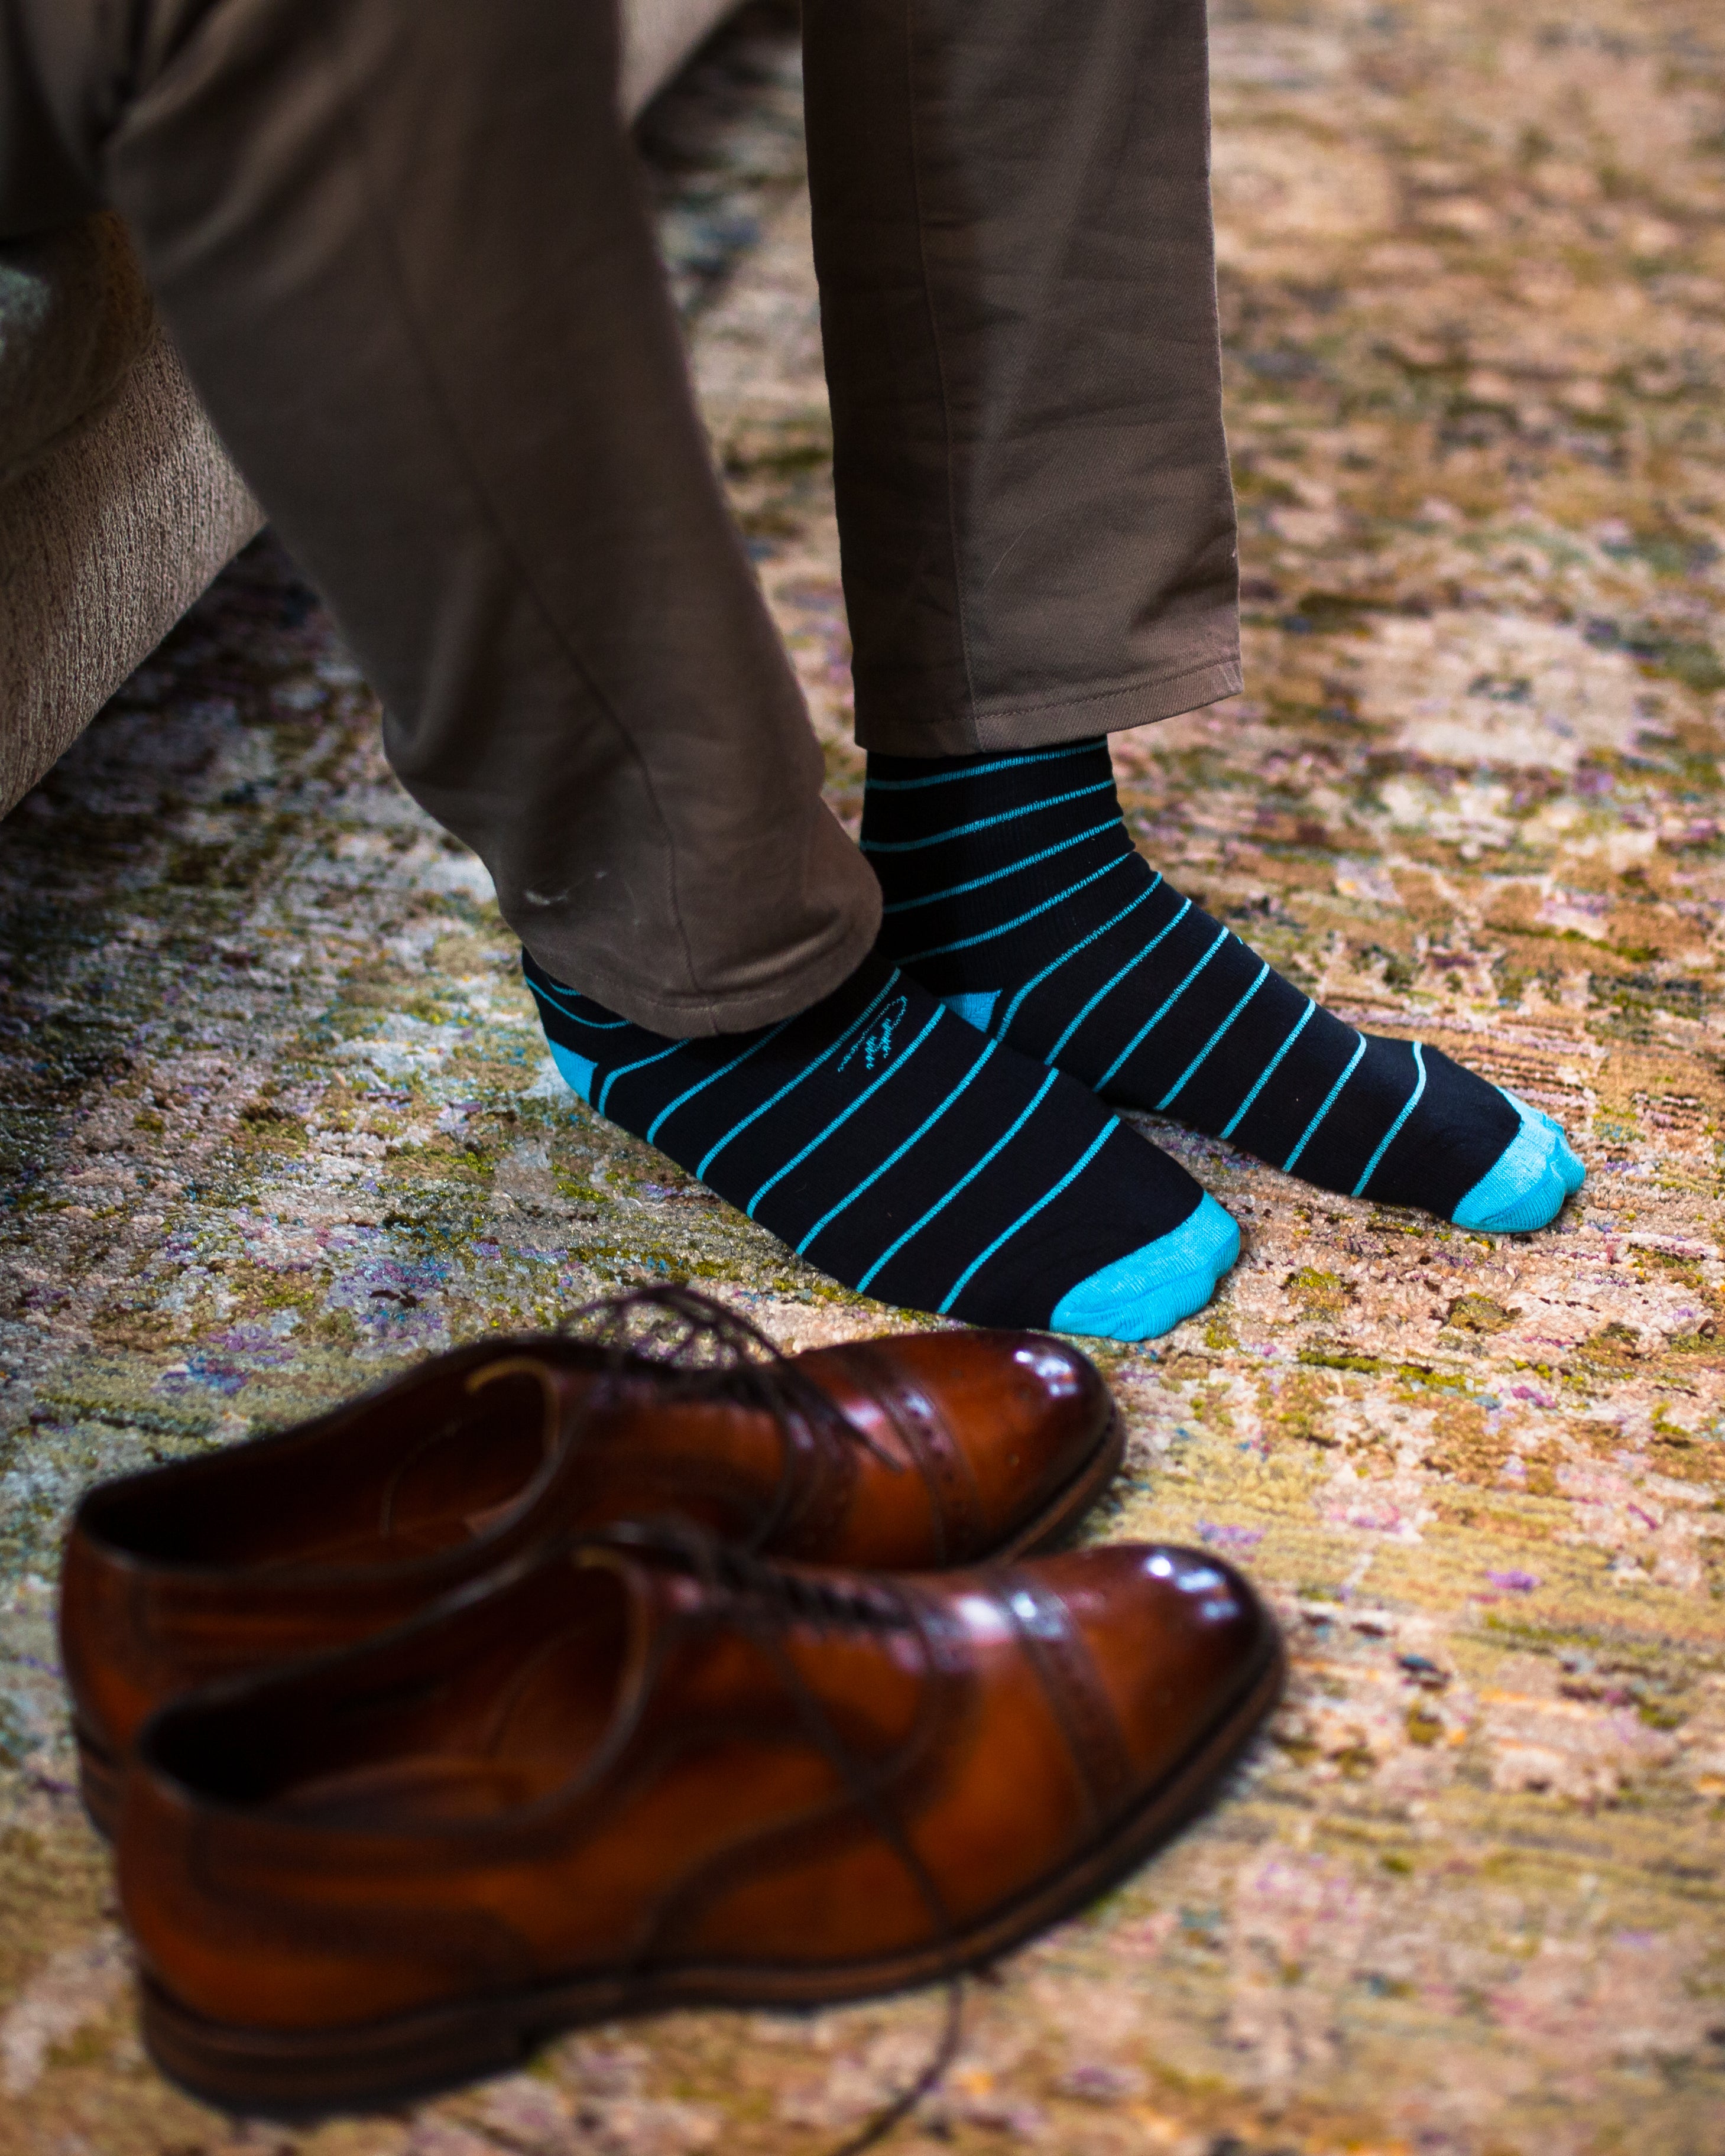 black over the calf dress socks with light blue stripes, brown dress shoes on the floor, grey pants